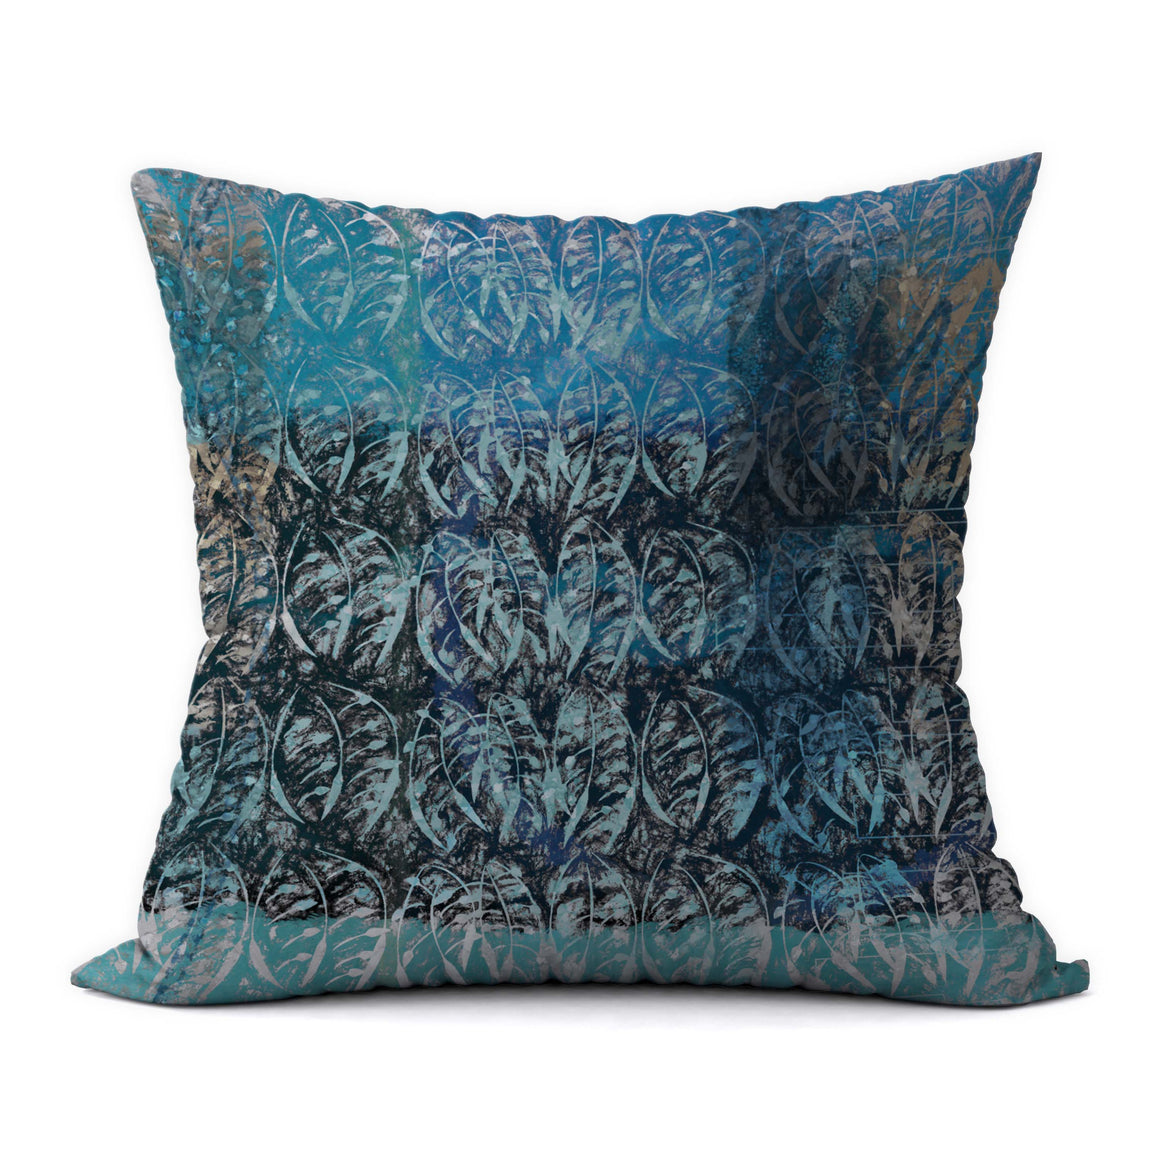 Sunny Day Blues 2 #645 Decorative Throw Pillow